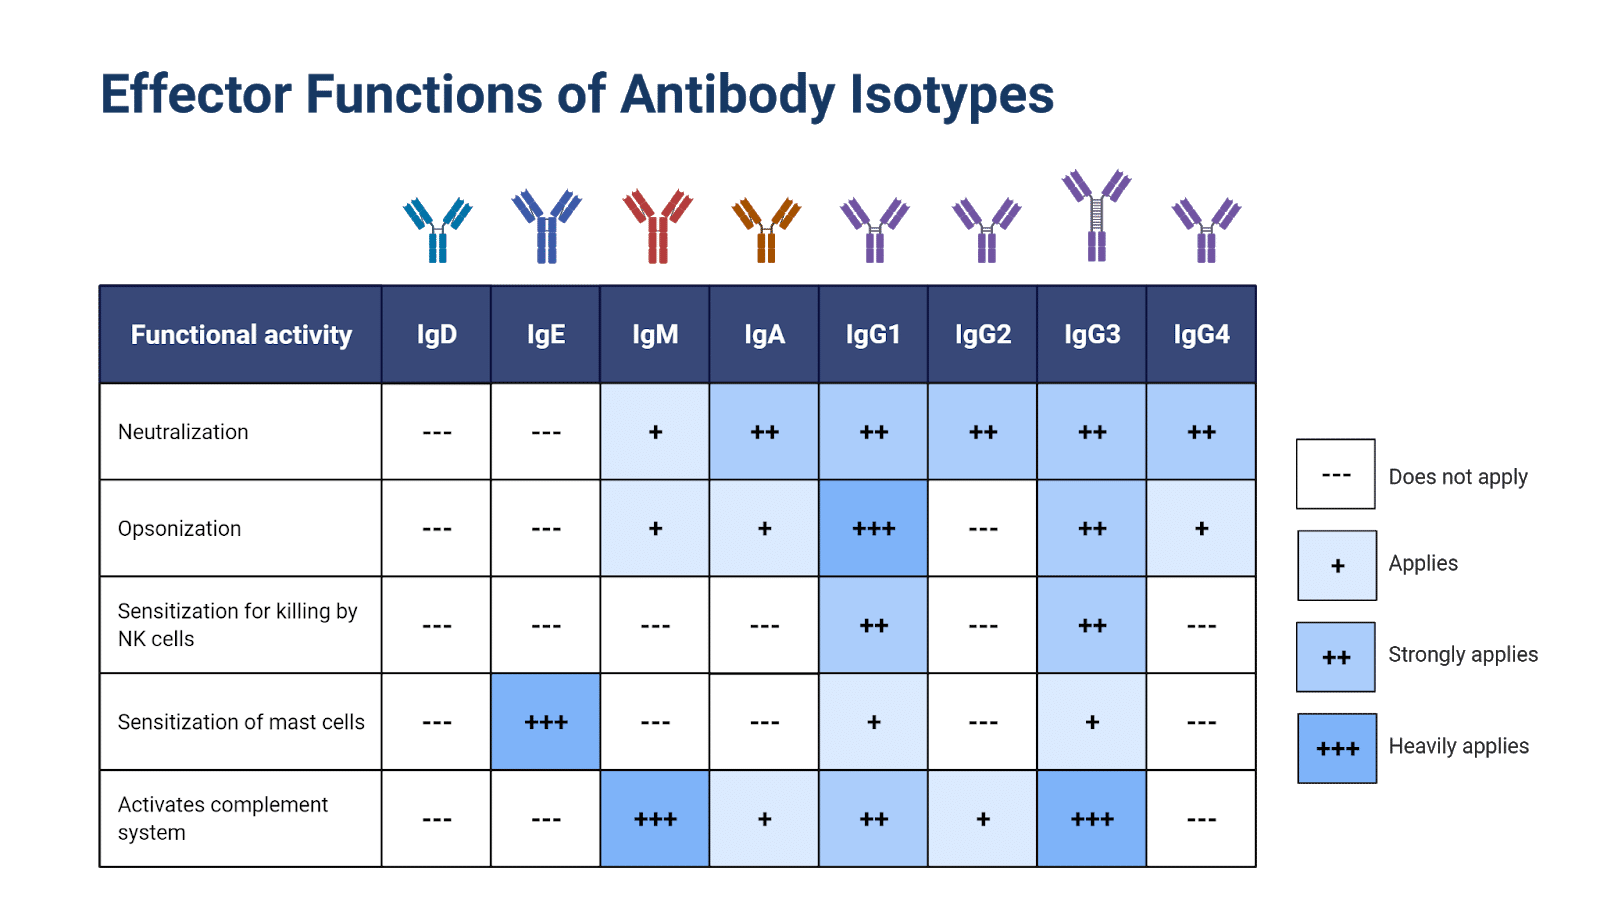 Effector functions of human antibody isotypes